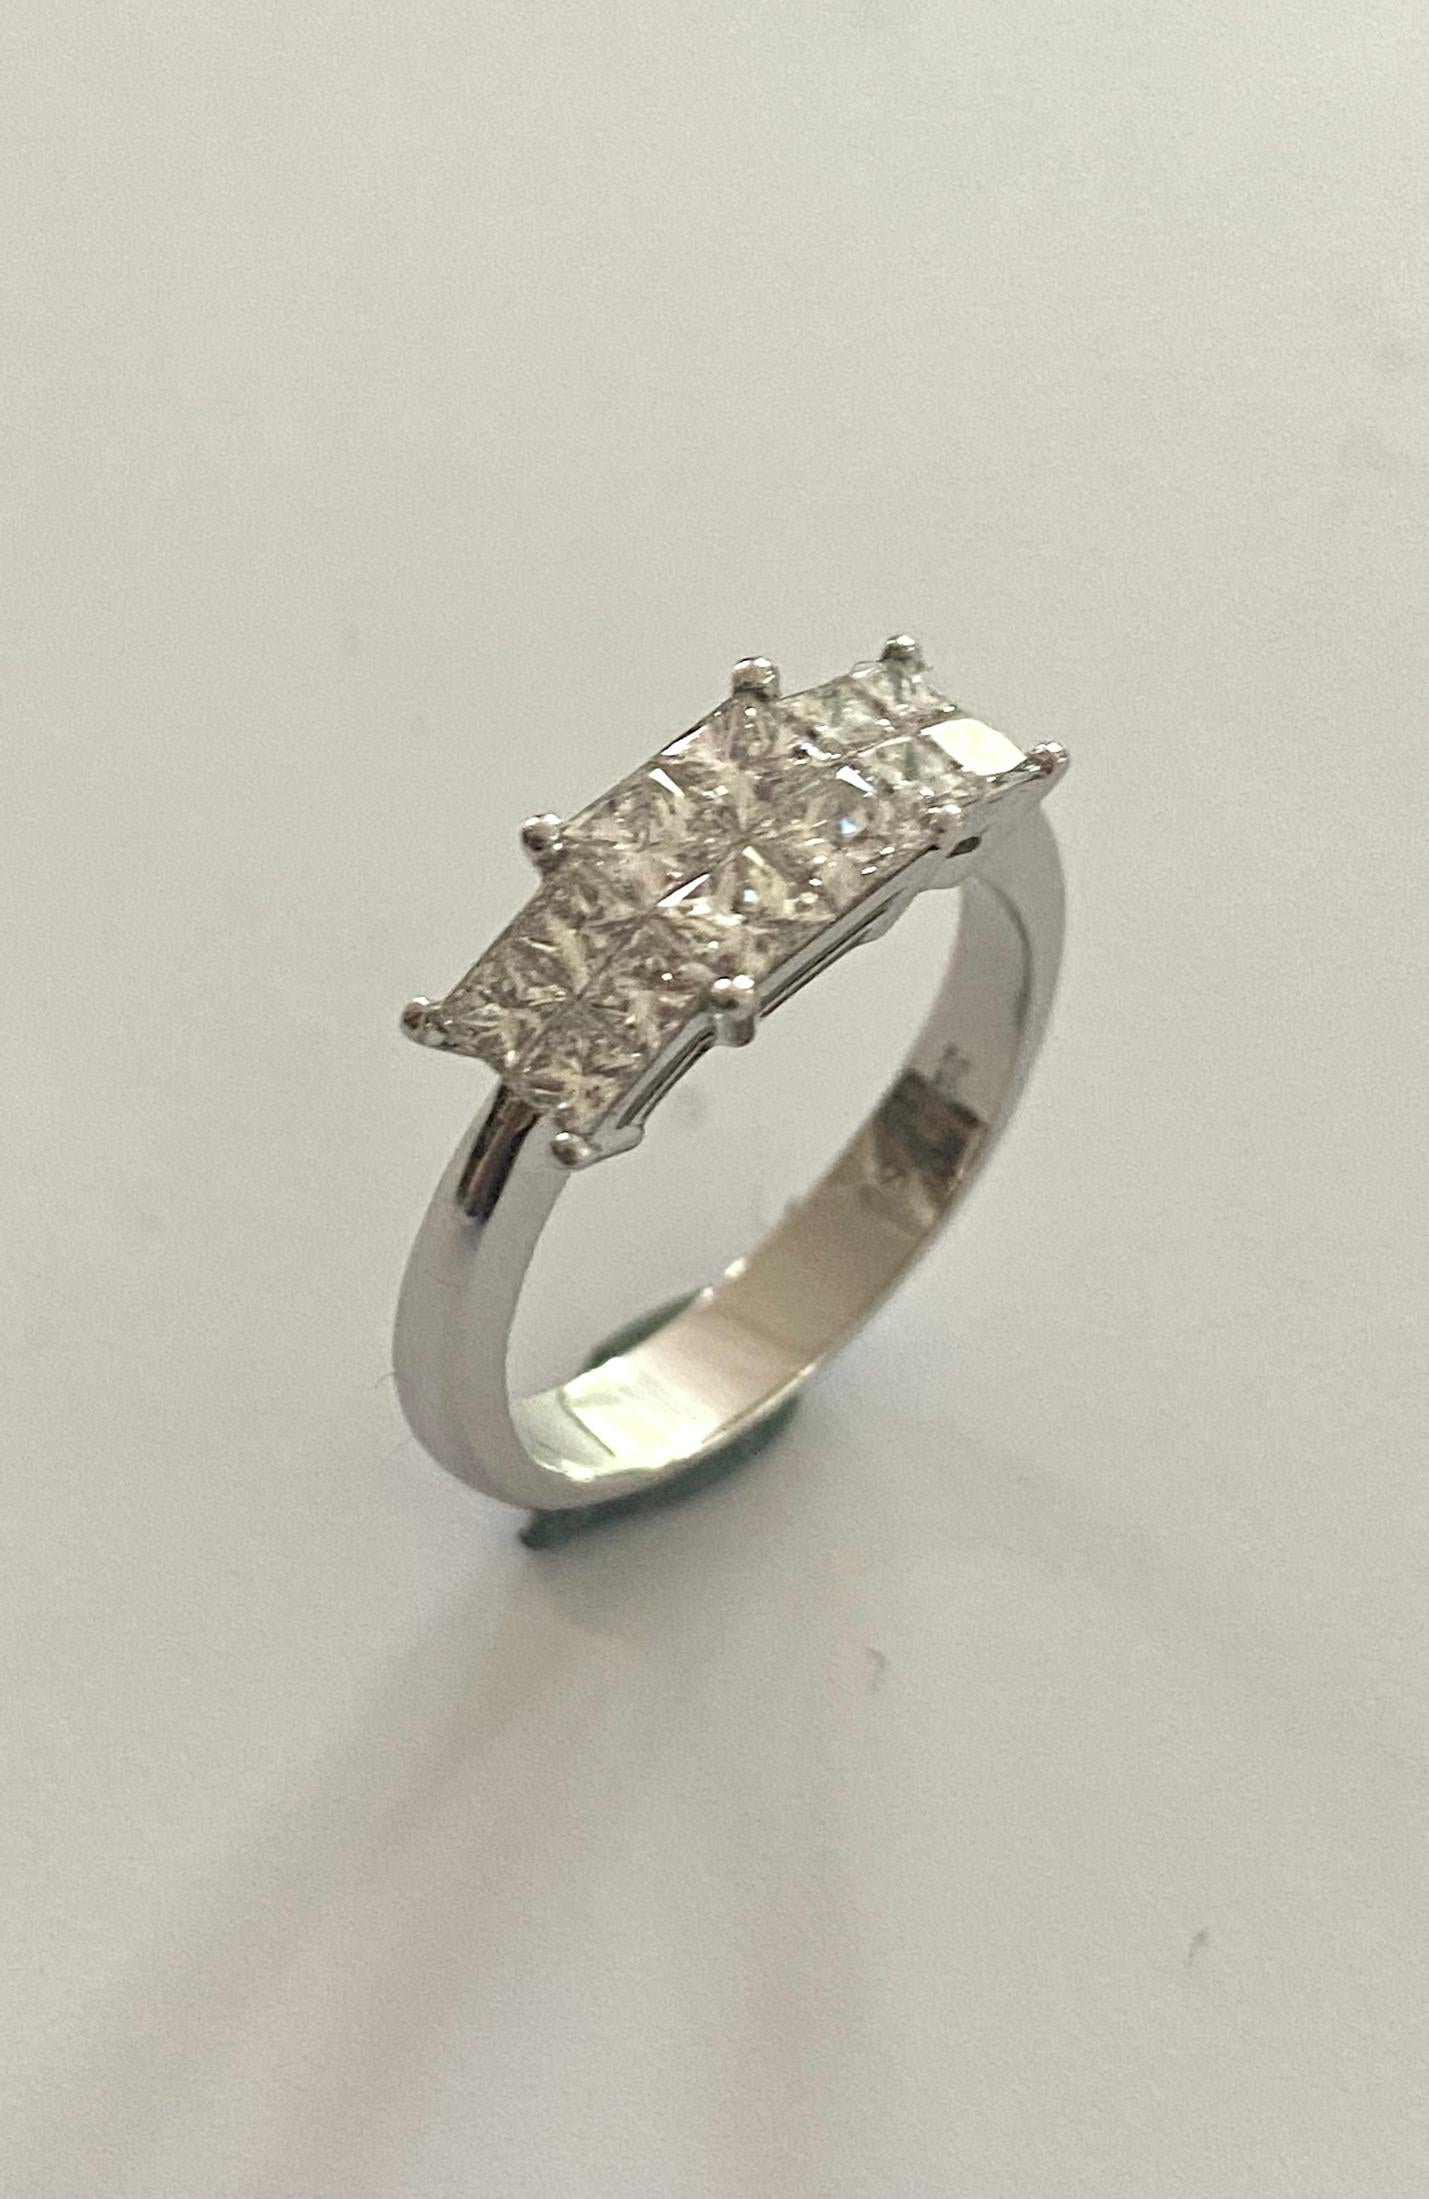 An 18K. white gold ring. classic model set with 12 princess cut diamonds weighing together ± 1.19 ct.
Quality: VVS Color: F-G
Weight: 4.68 grams
size: 17.5 (55) USA: 7 UK: O
top ring size: 16 x 6 x 4 mm
